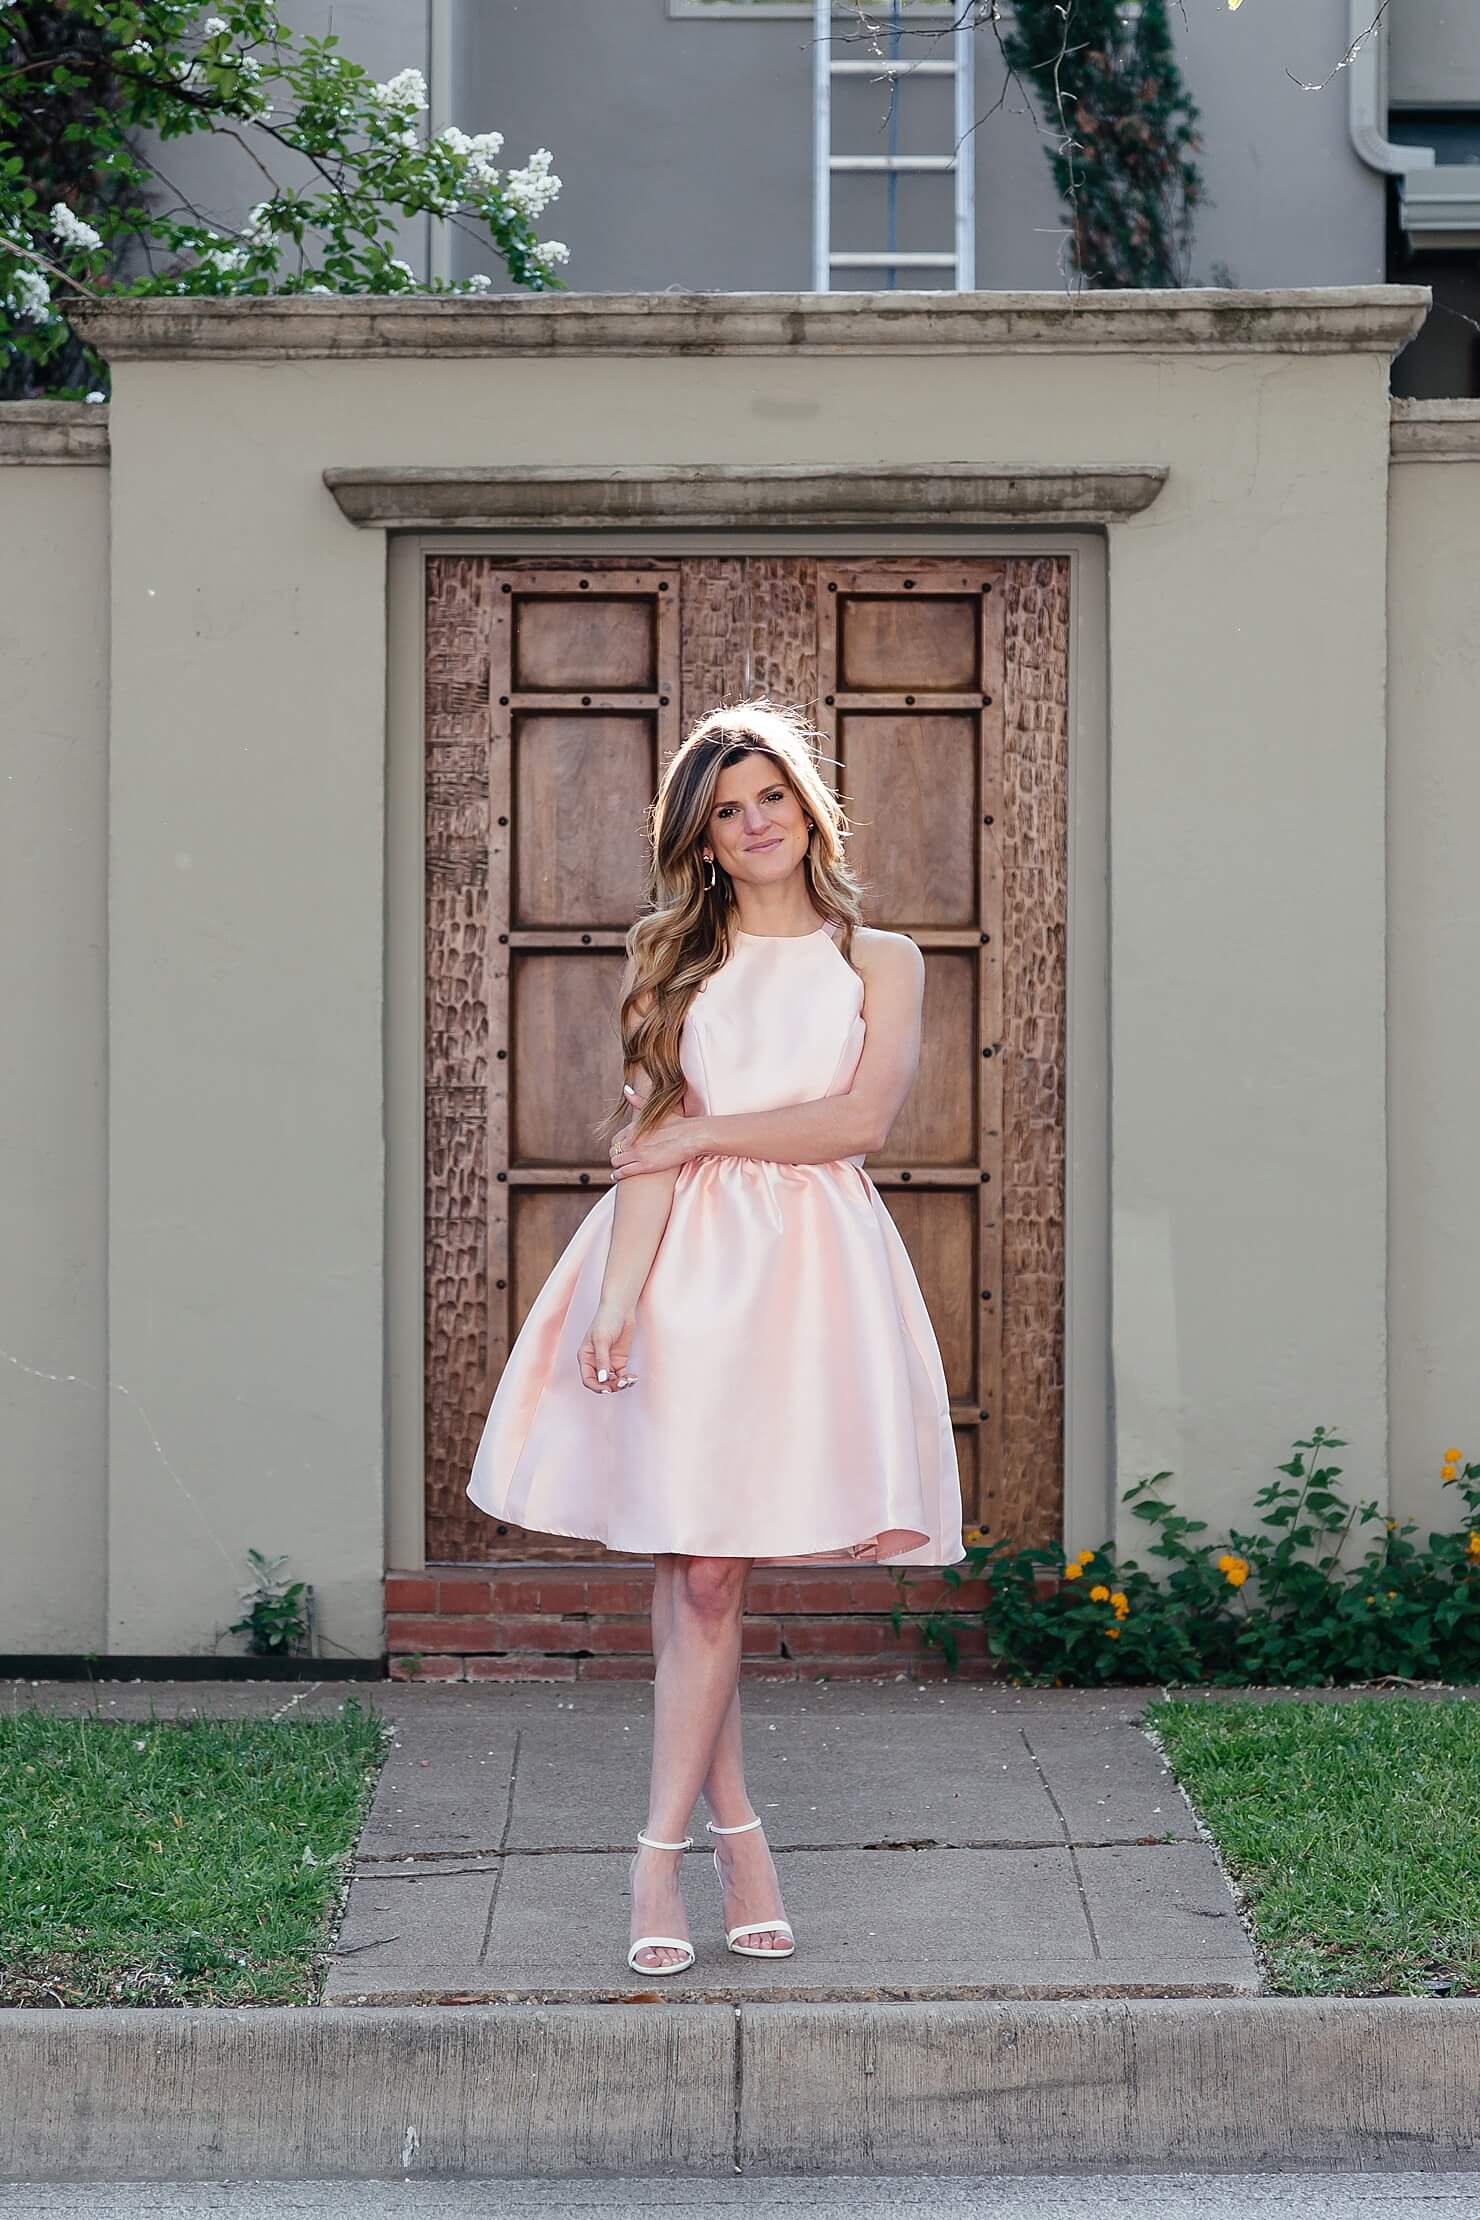 brighton the day wearing blush pink satin dress with white heels for wedding guest outfit